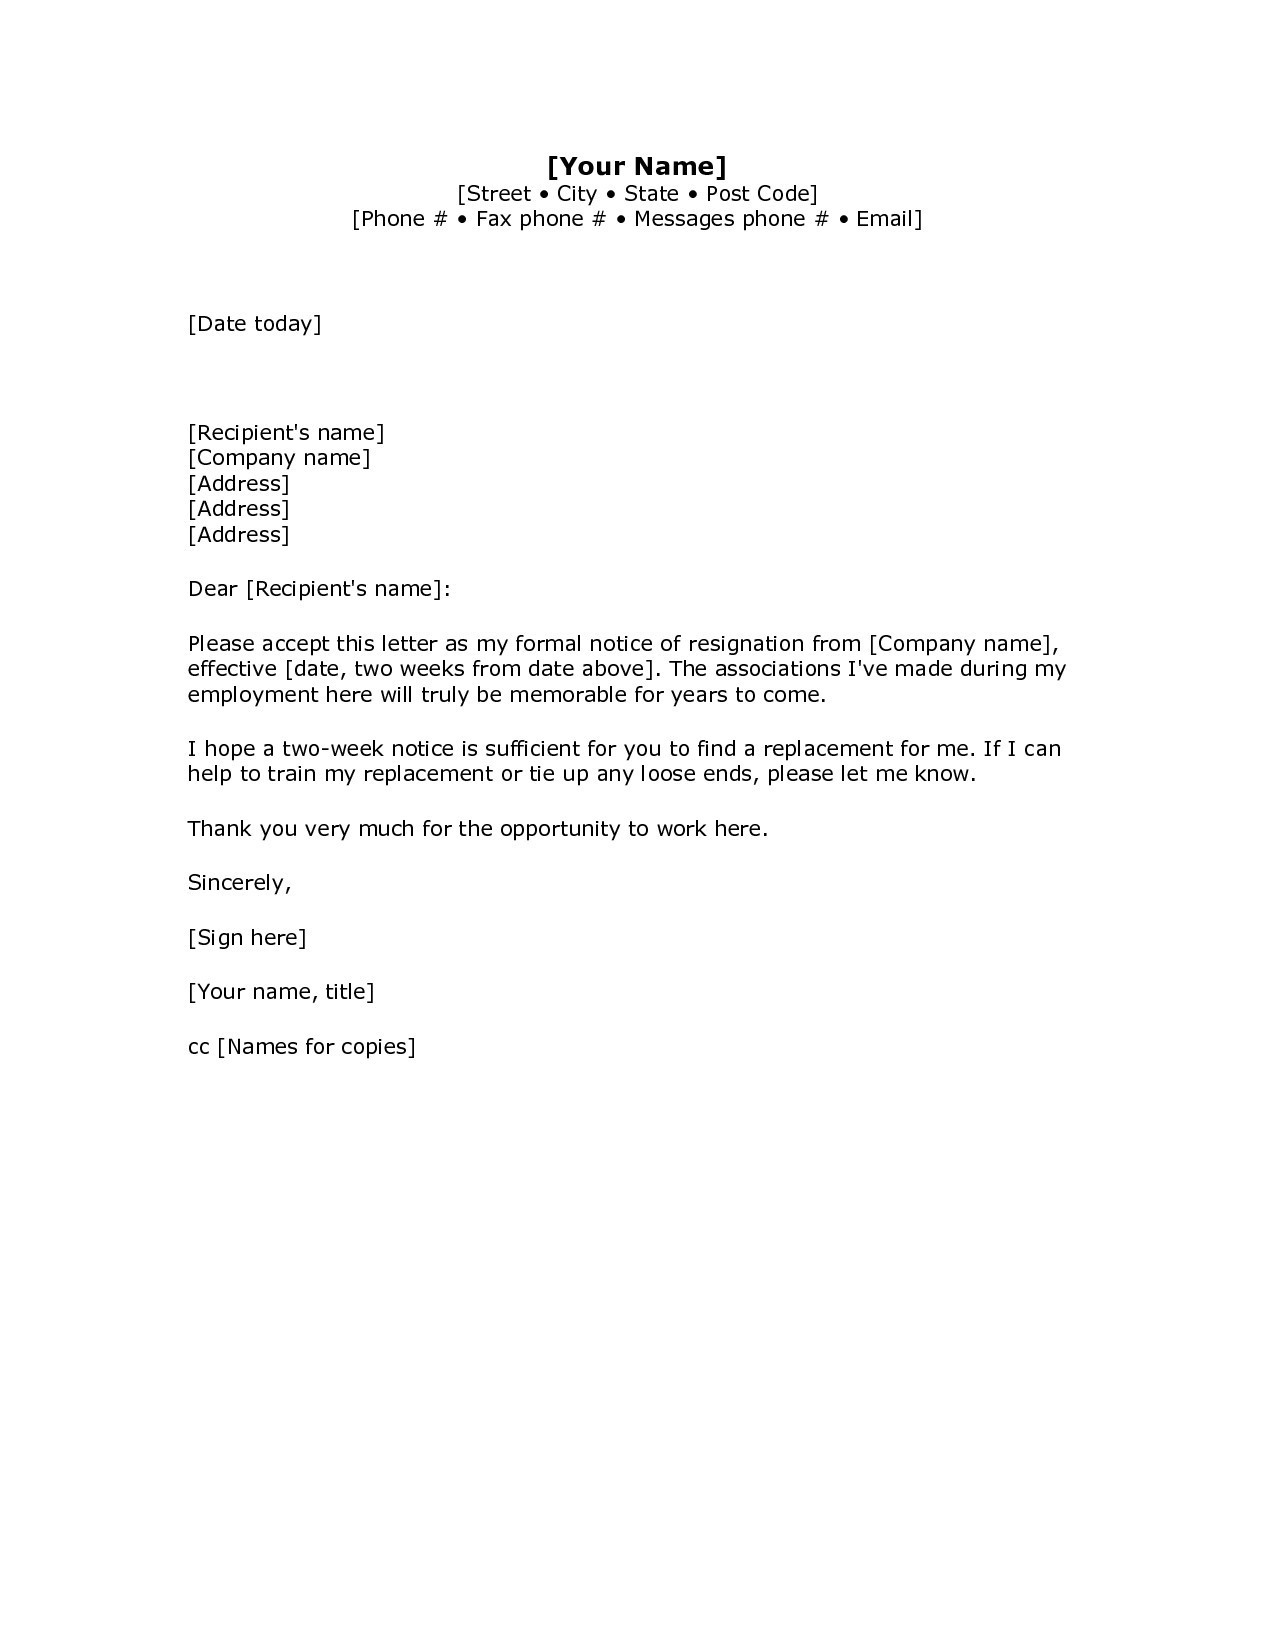 Rent Reduction Letter Template - Sample Letter Request Discount Rental Archives Onelovebahamas